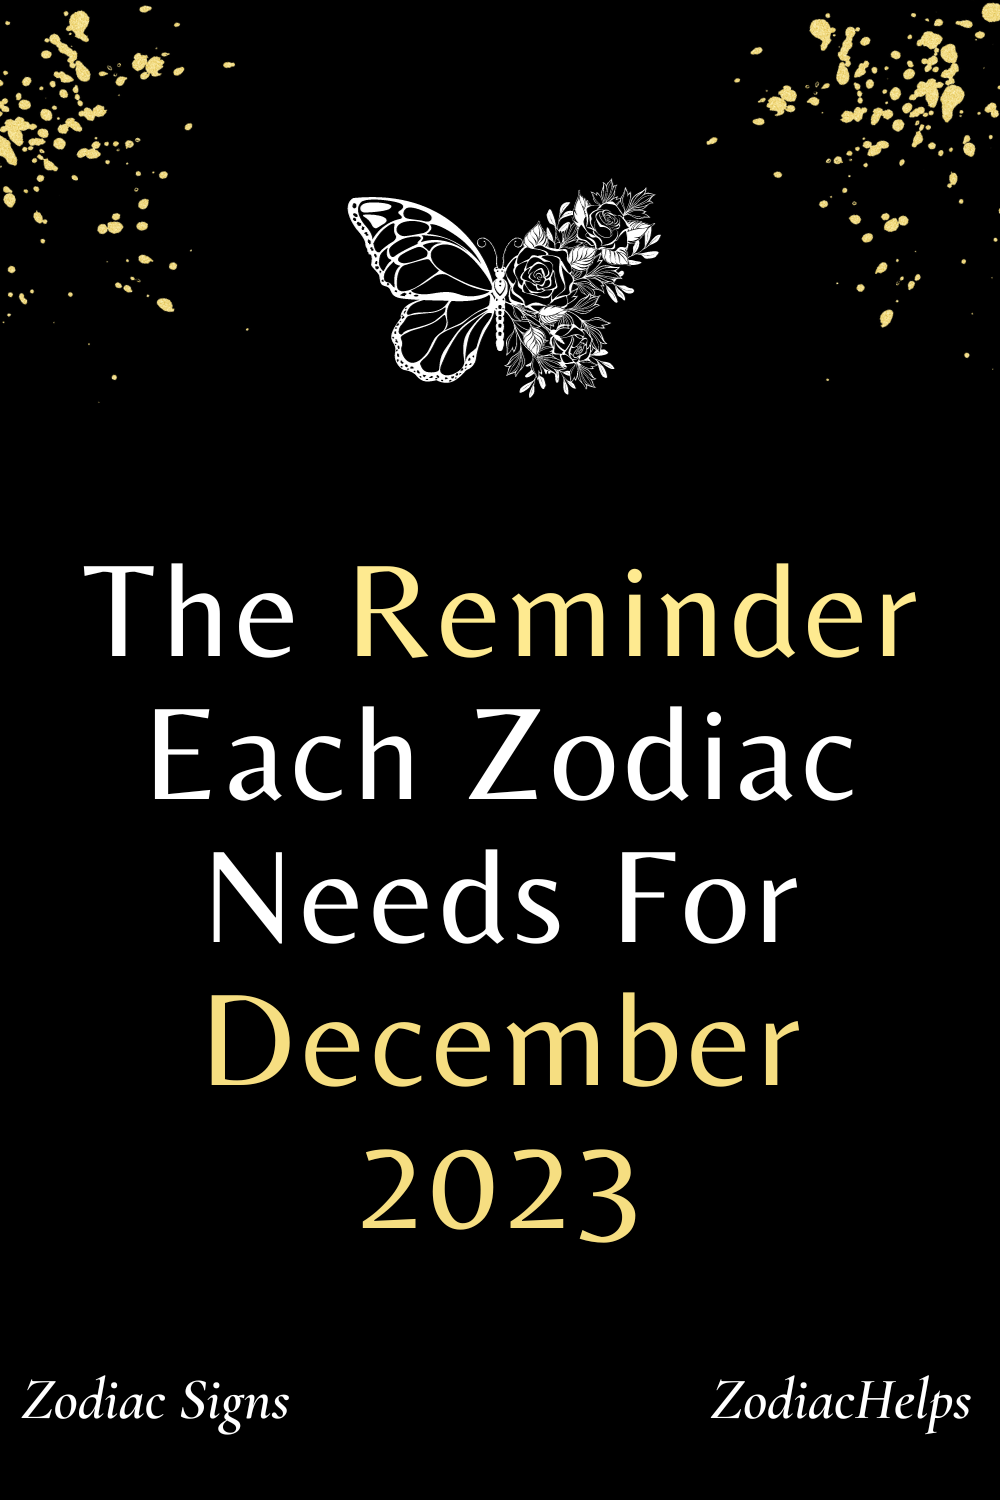 The Reminder Each Zodiac Needs For December 2023